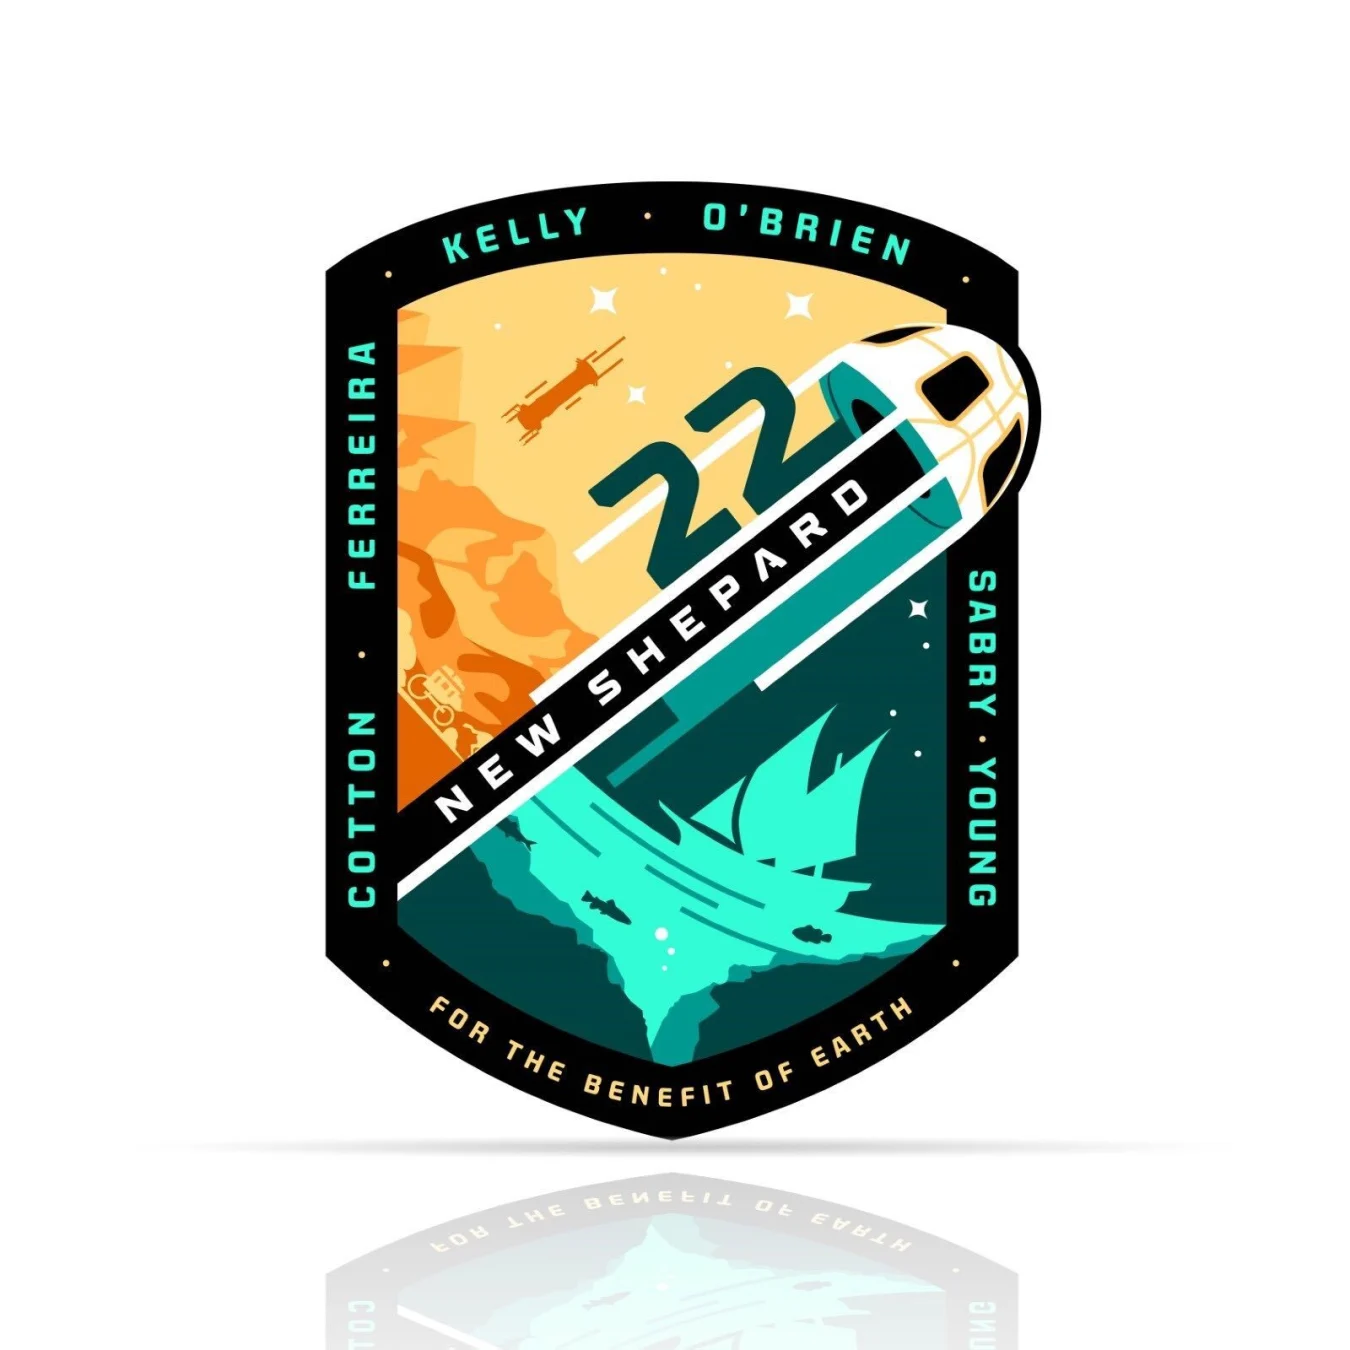 Mission patch for New Shepard's NS-22 mission.  It features symbols including: The Pyramids of Egypt represent Sara Sabry's legacy and celebrate her achievement as the country's first astronaut.  The Mariana Trench represents Vanessa O'Brien's feat of reaching the Challenger Deep, Earth's deepest point.  The flight case is depicted as a basketball, symbolizing Dude Perfect's trick shots and Coby Cotton's role in co-founding the company.  Magellan's ship represents Mário Ferreira's Portuguese heritage and lifelong passion for adventure.  The fish swimming beneath Magellan's ship represent Steve Young's passion for fishing.  The carriage represents Clint Kelly III's desire for humanity to reach new frontiers of space.  The new Shepard booster and the West Texas Mountains are also featured in the patch.